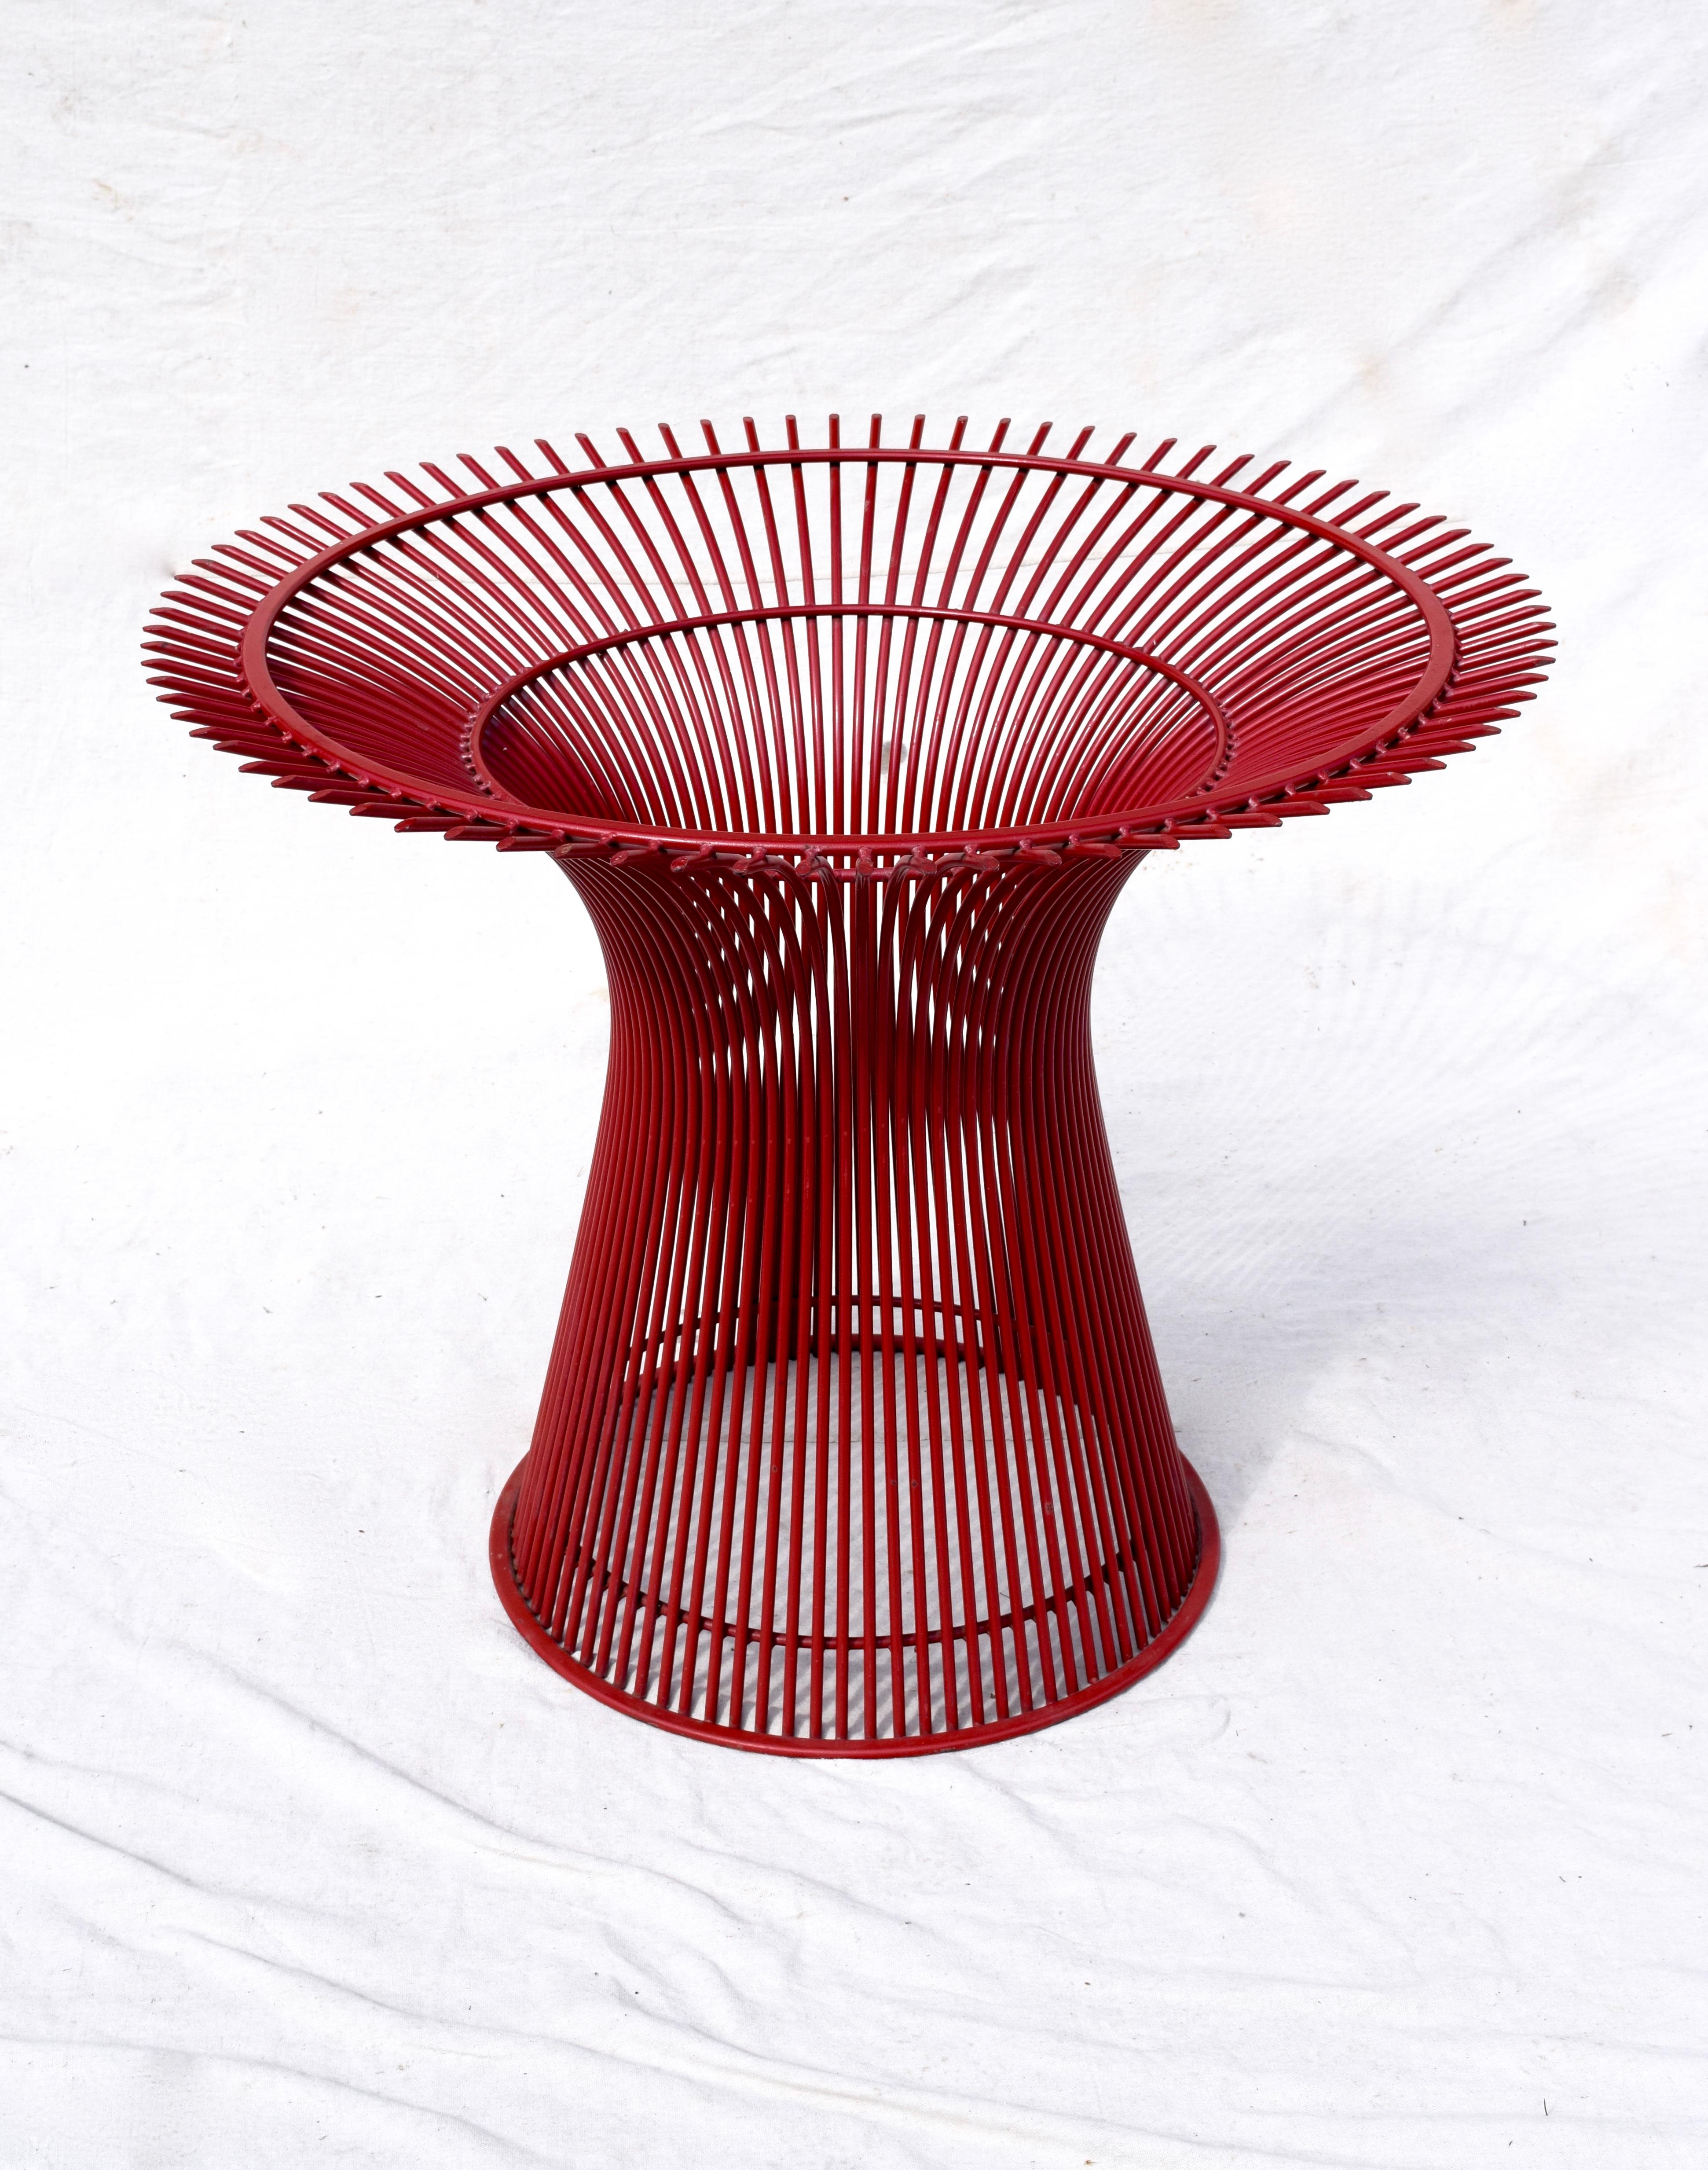 American Rare 1970s Warren Platner Dining Table by Knoll